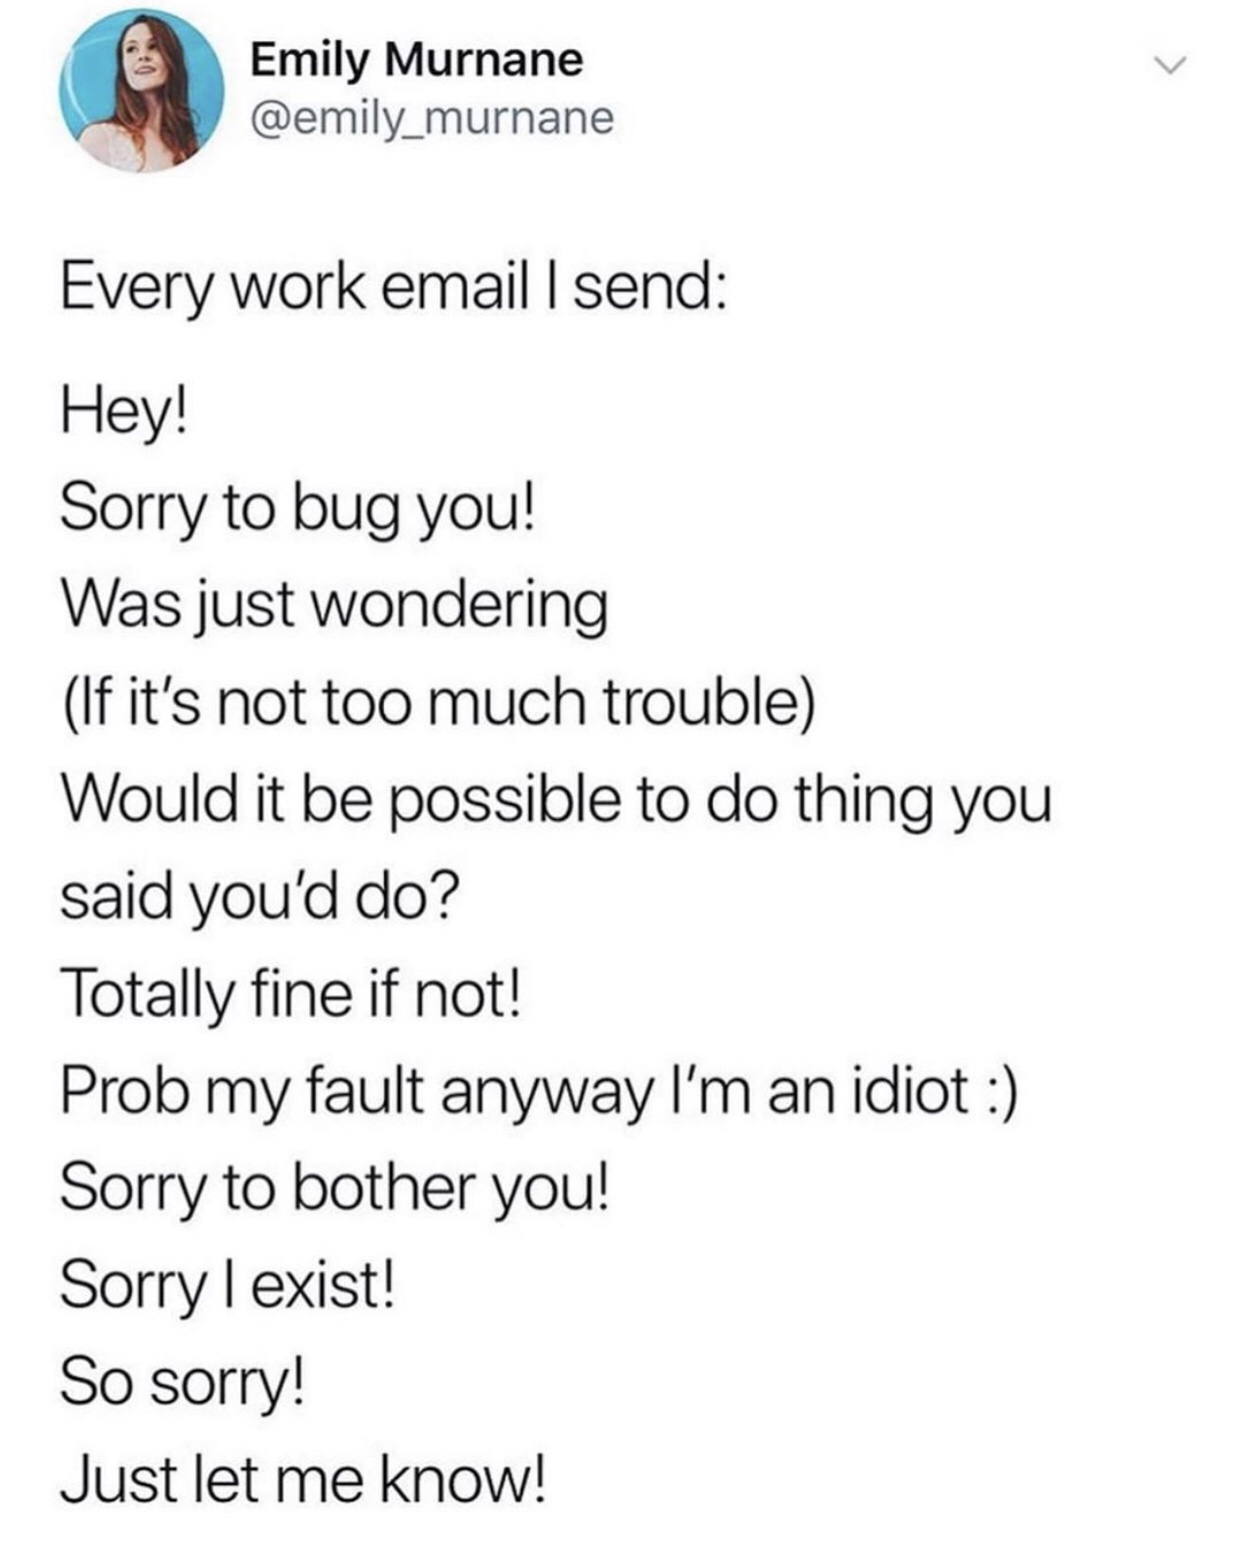 maksud allah yuftah alaikum - Emily Murnane Every work email I send Hey! Sorry to bug you! Was just wondering If it's not too much trouble Would it be possible to do thing you said you'd do? Totally fine if not! Prob my fault anyway I'm an idiot Sorry to 